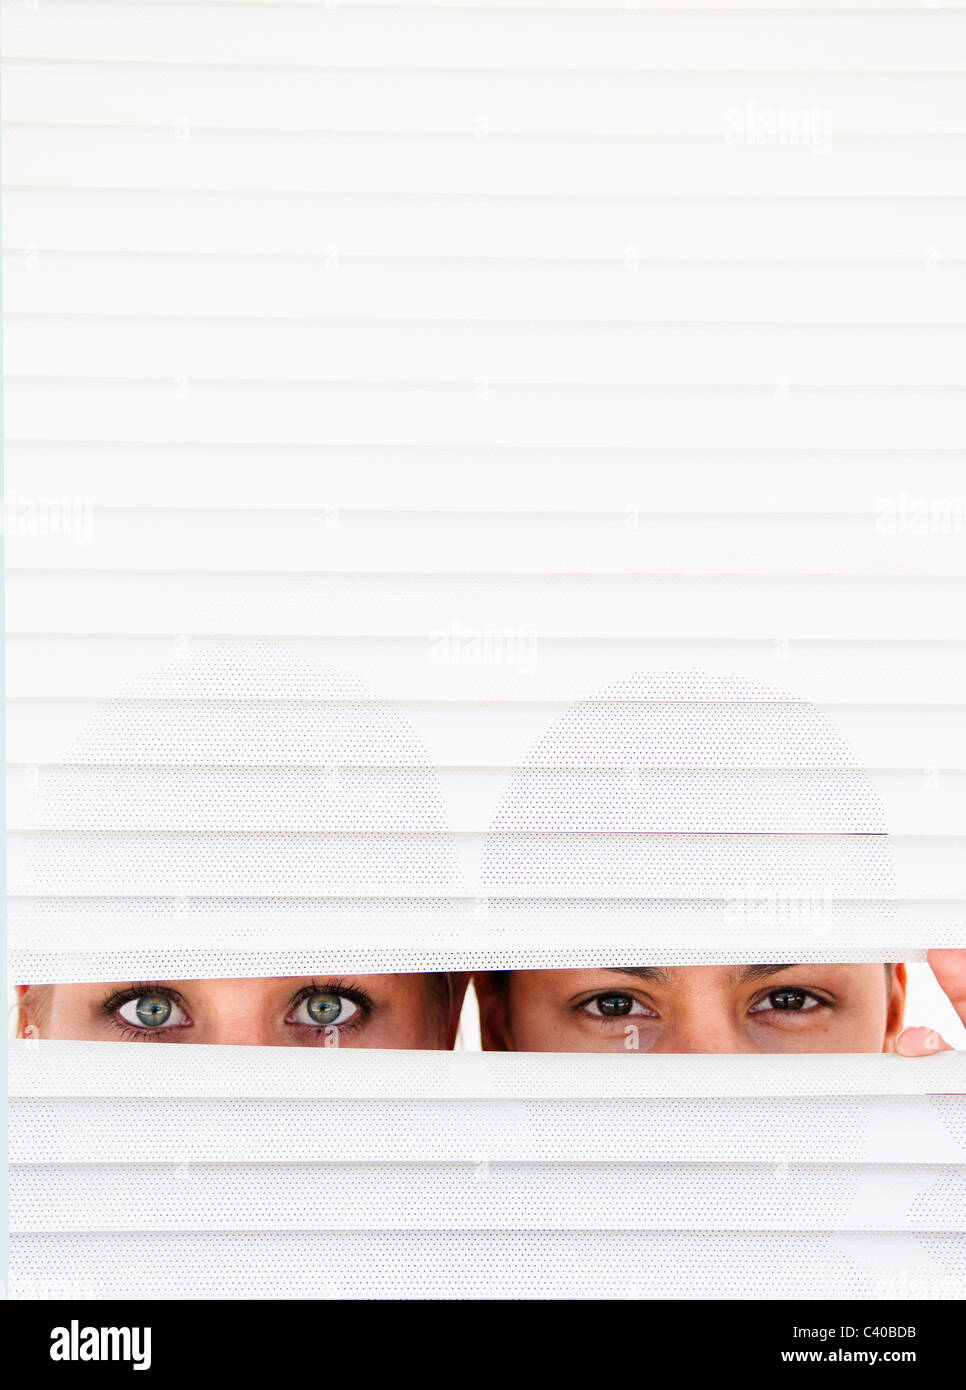 Two women look through blinds Stock Photo